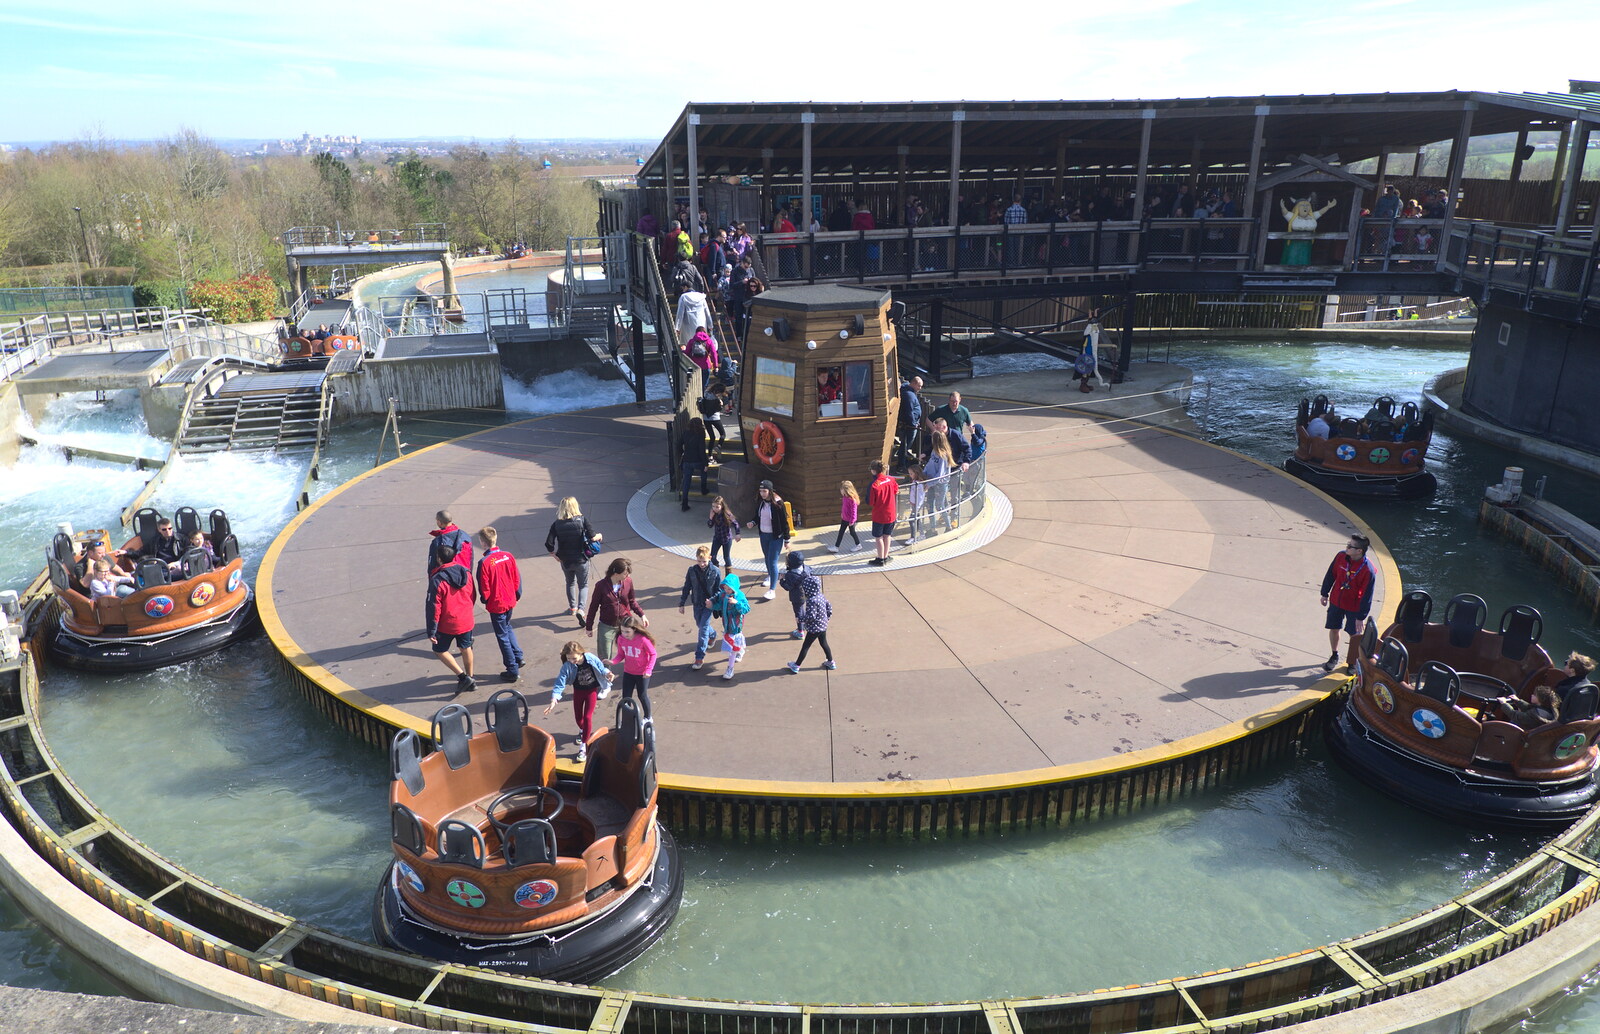 The rapids ride from A Trip to Legoland, Windsor, Berkshire - 25th March 2017